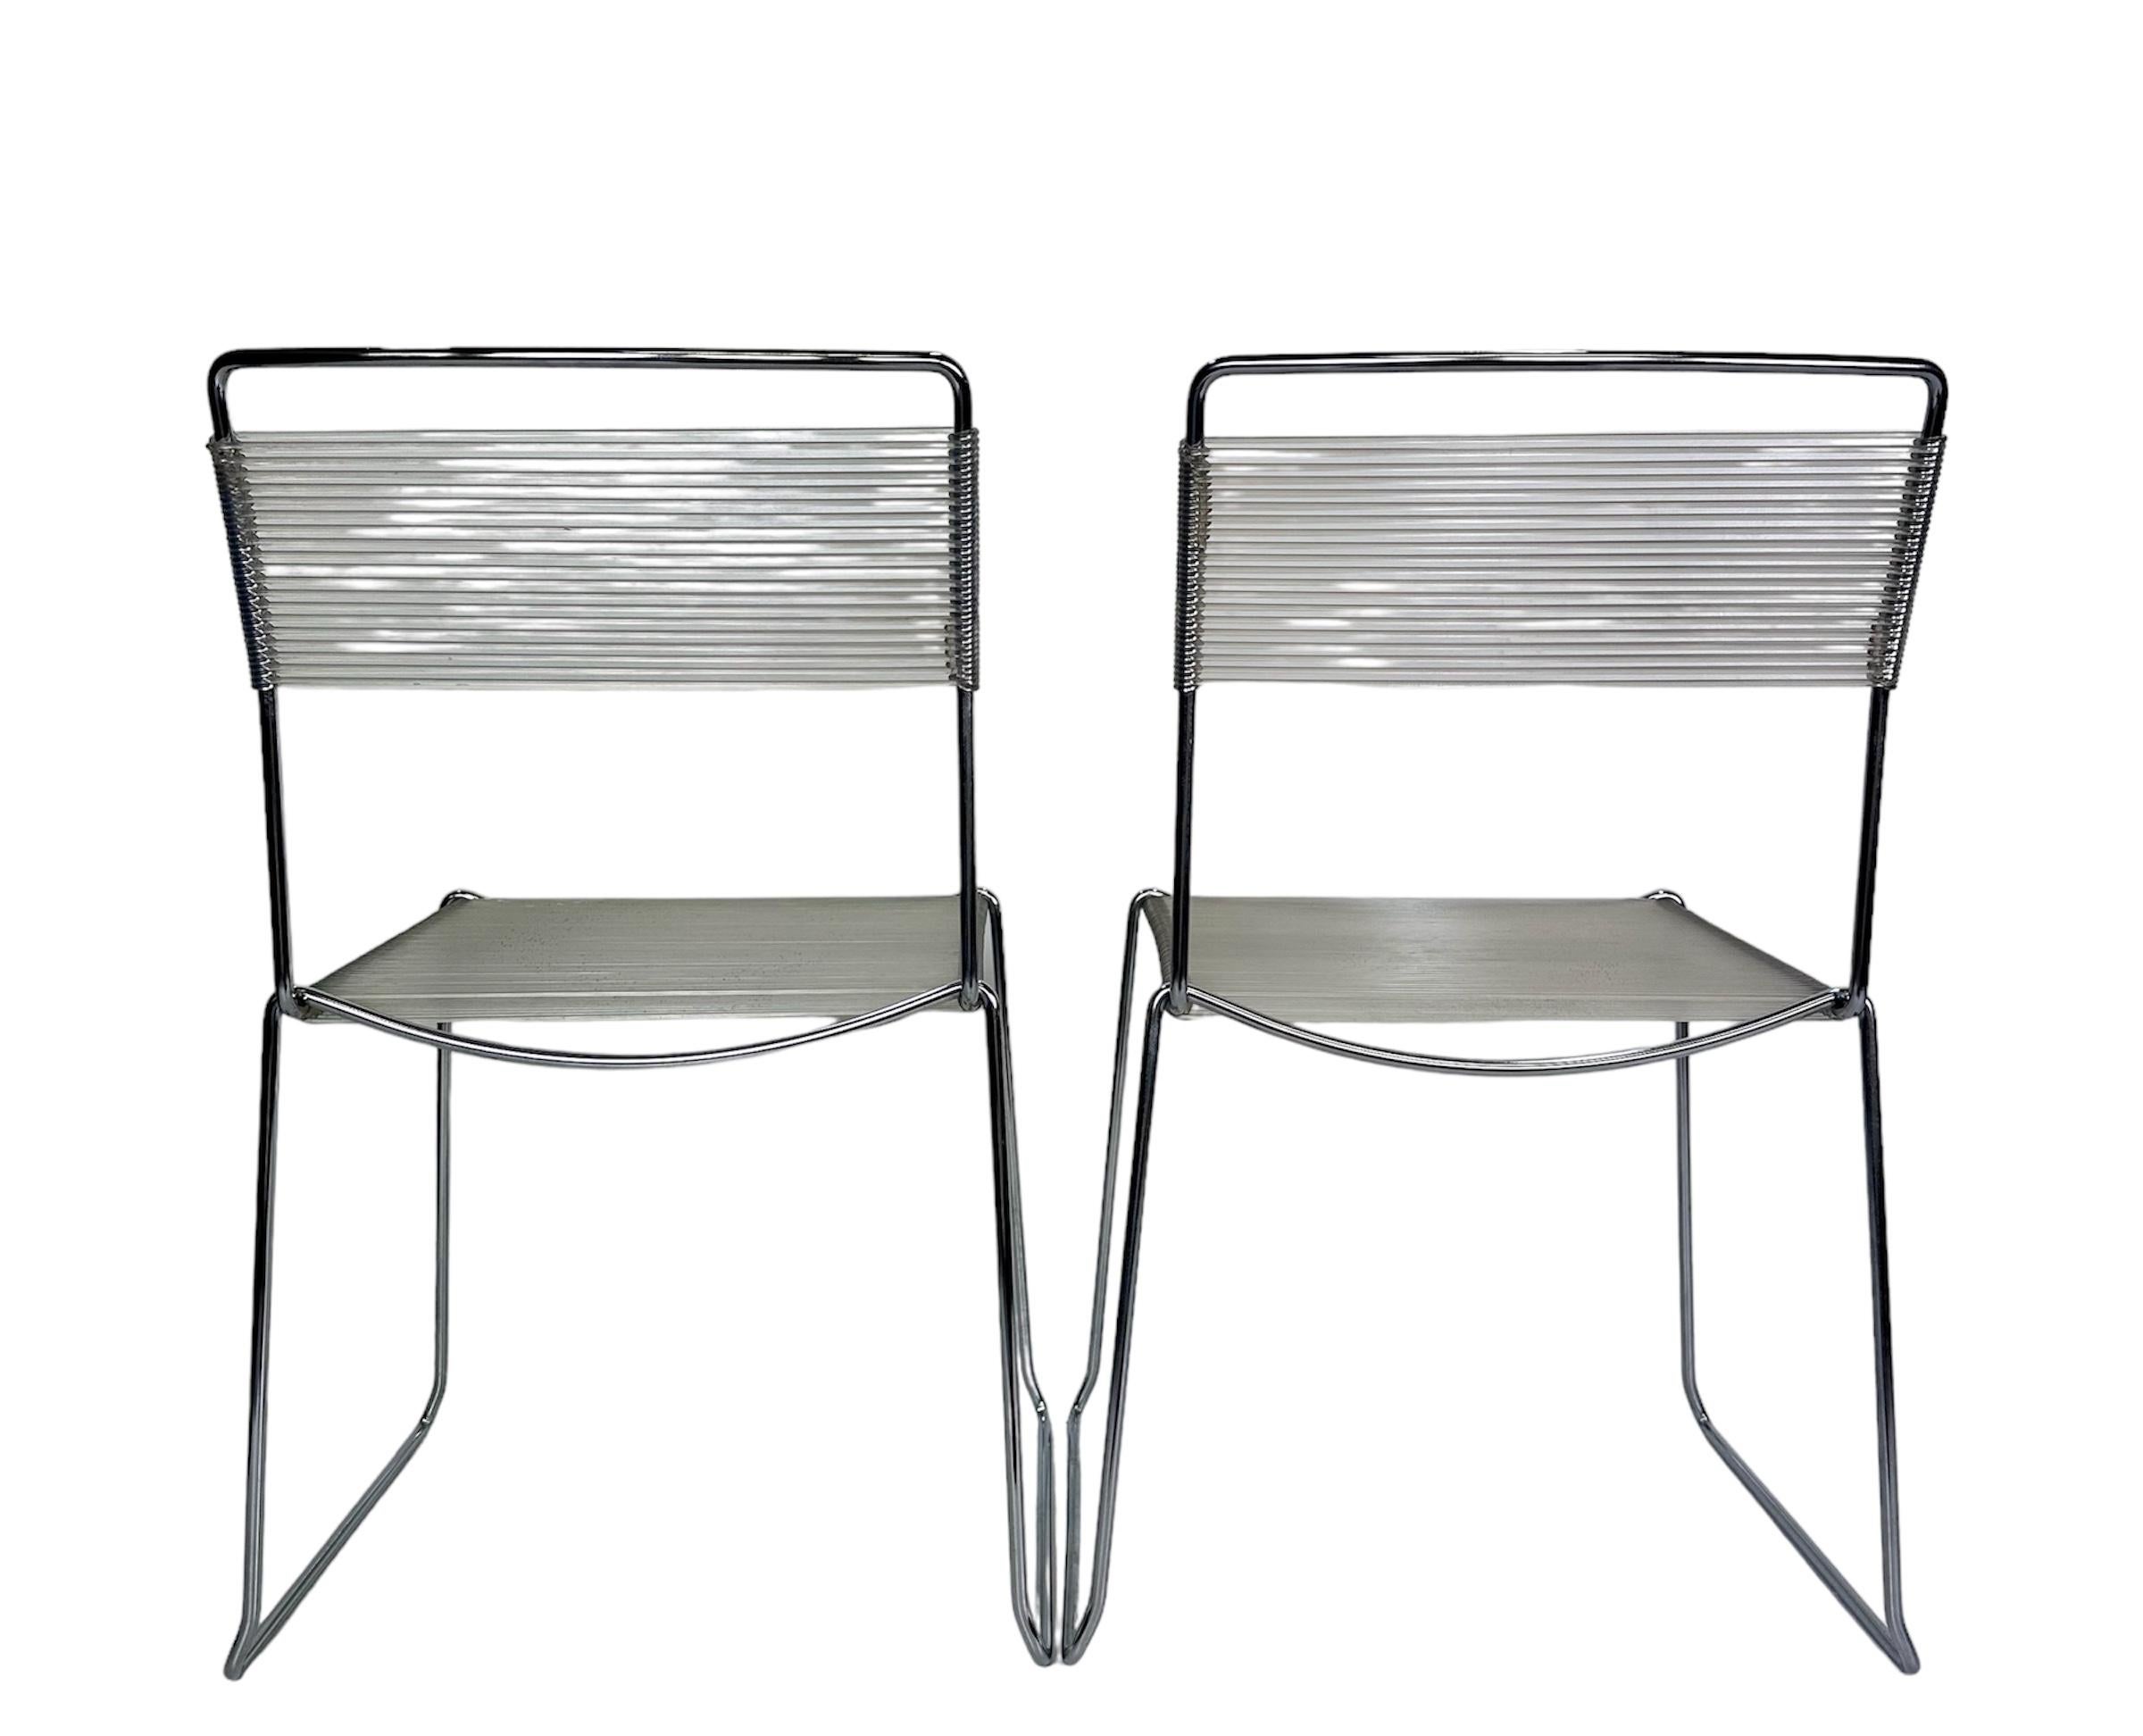 Set of Four Spaghetti Chairs by Giandomenico Belotti for Alias, 1980s In Good Condition For Sale In Philadelphia, PA